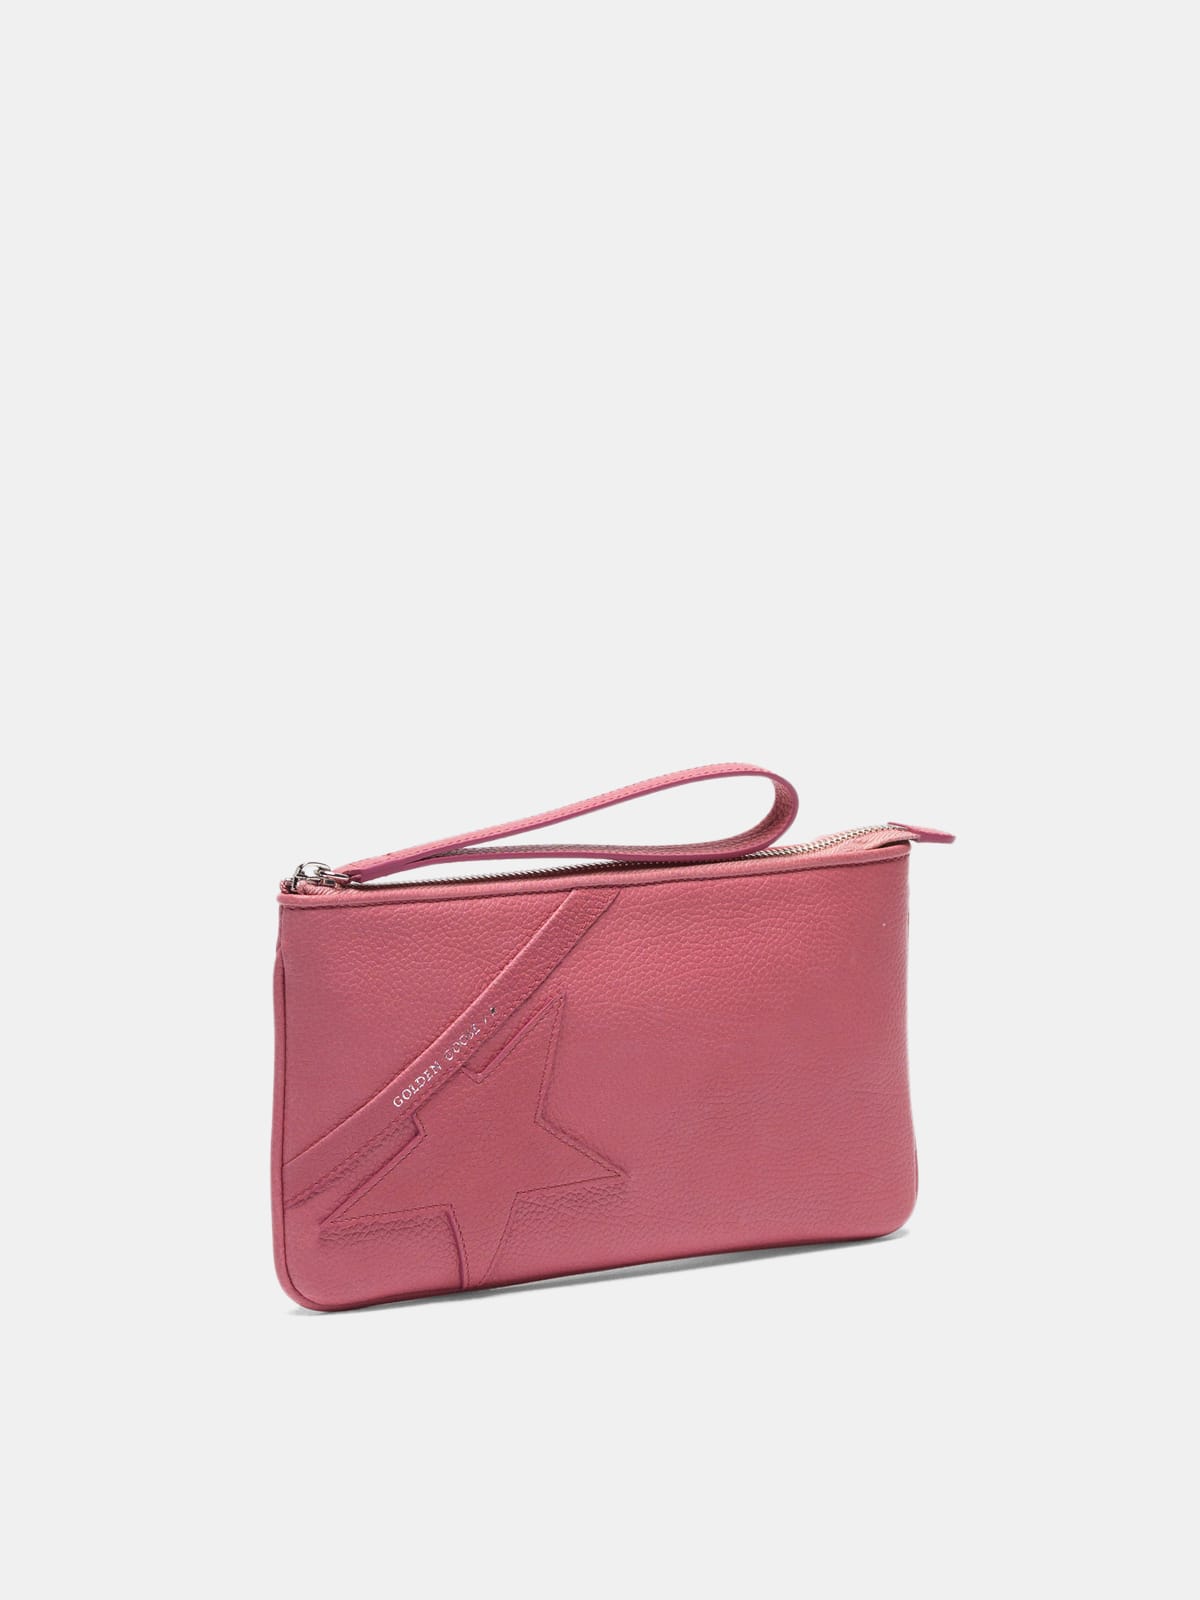 Golden Goose - Pink Star Wrist clutch bag in grained leather in 